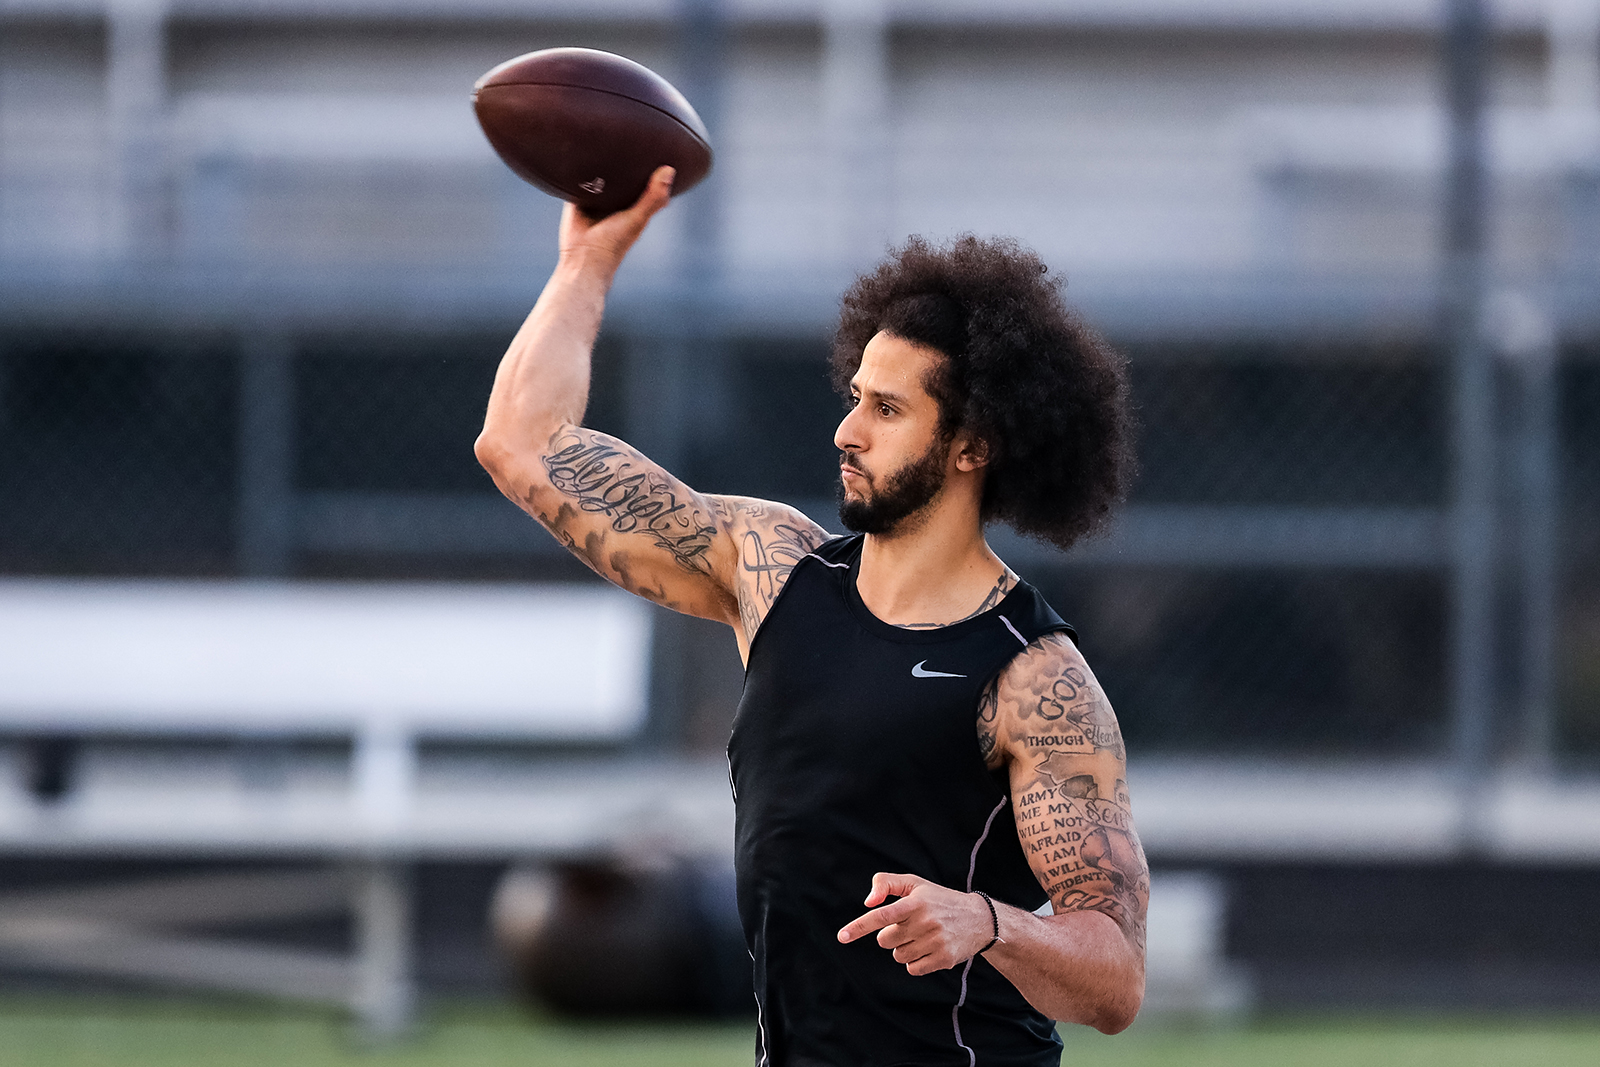 Colin Kaepernick looks to pass during his NFL workout held at Charles R Drew high school on November 16, 2019 in Riverdale, Georgia.